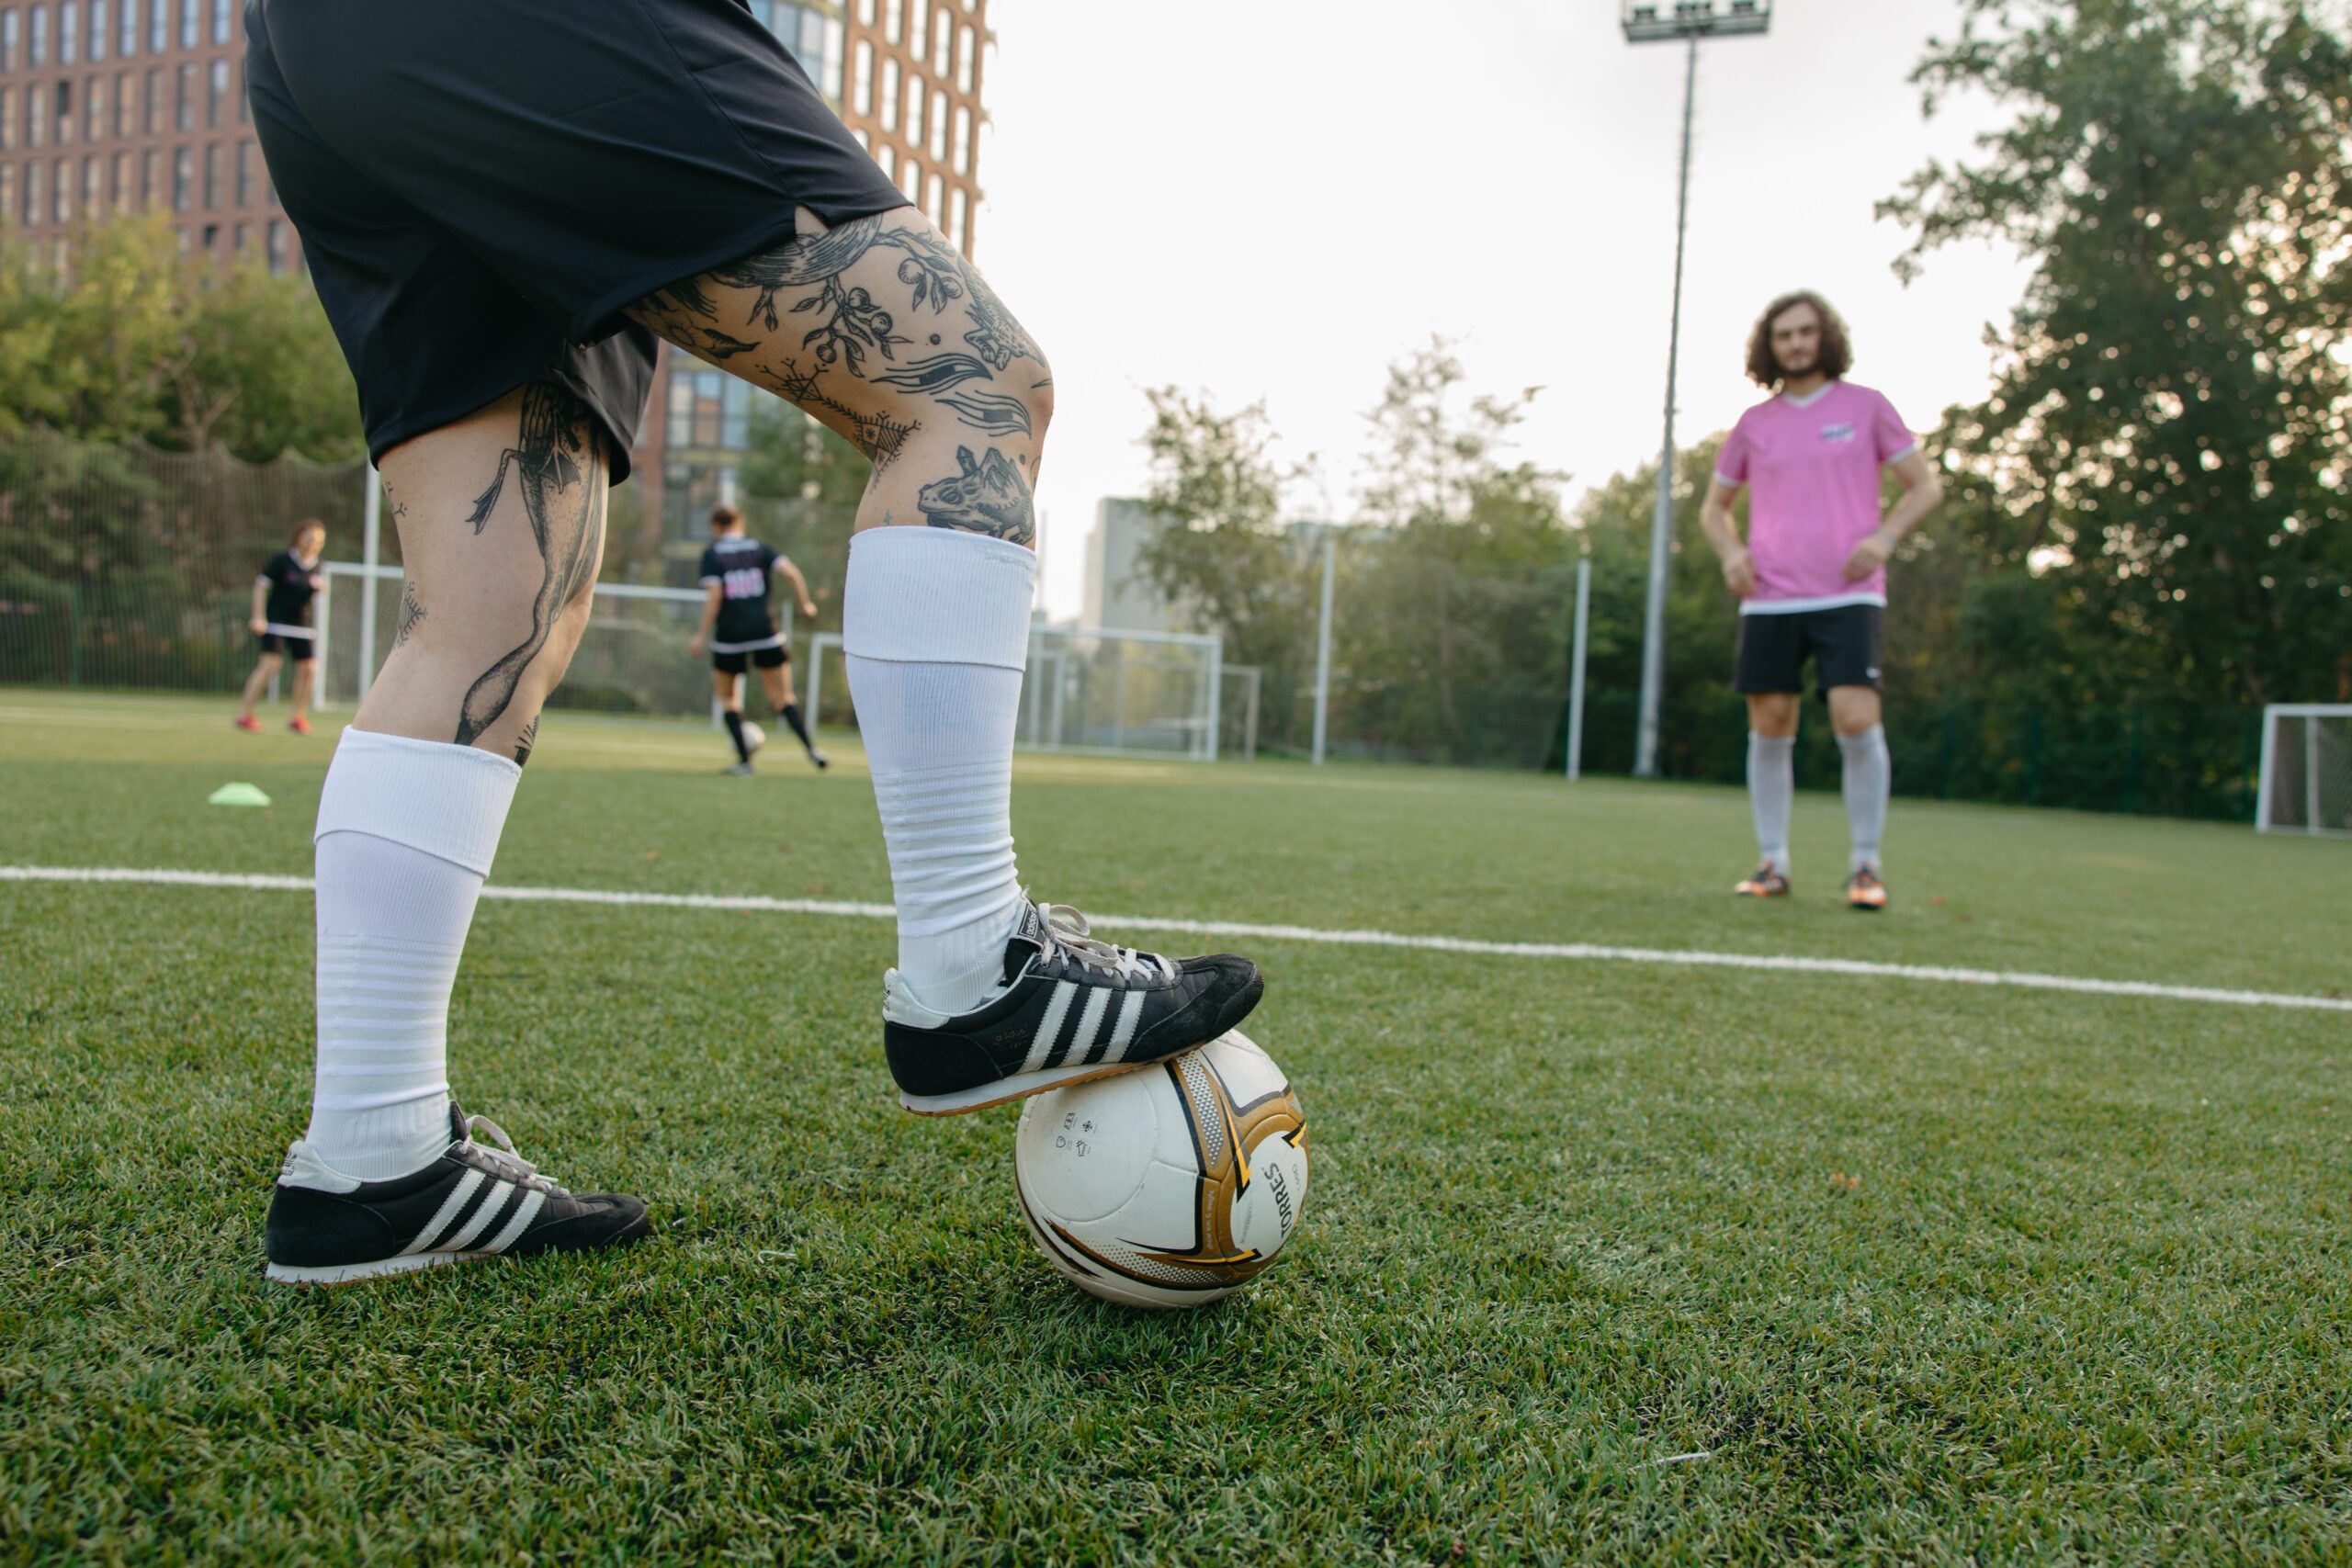 How Football Became a Popular Sport and Why You Should Try It